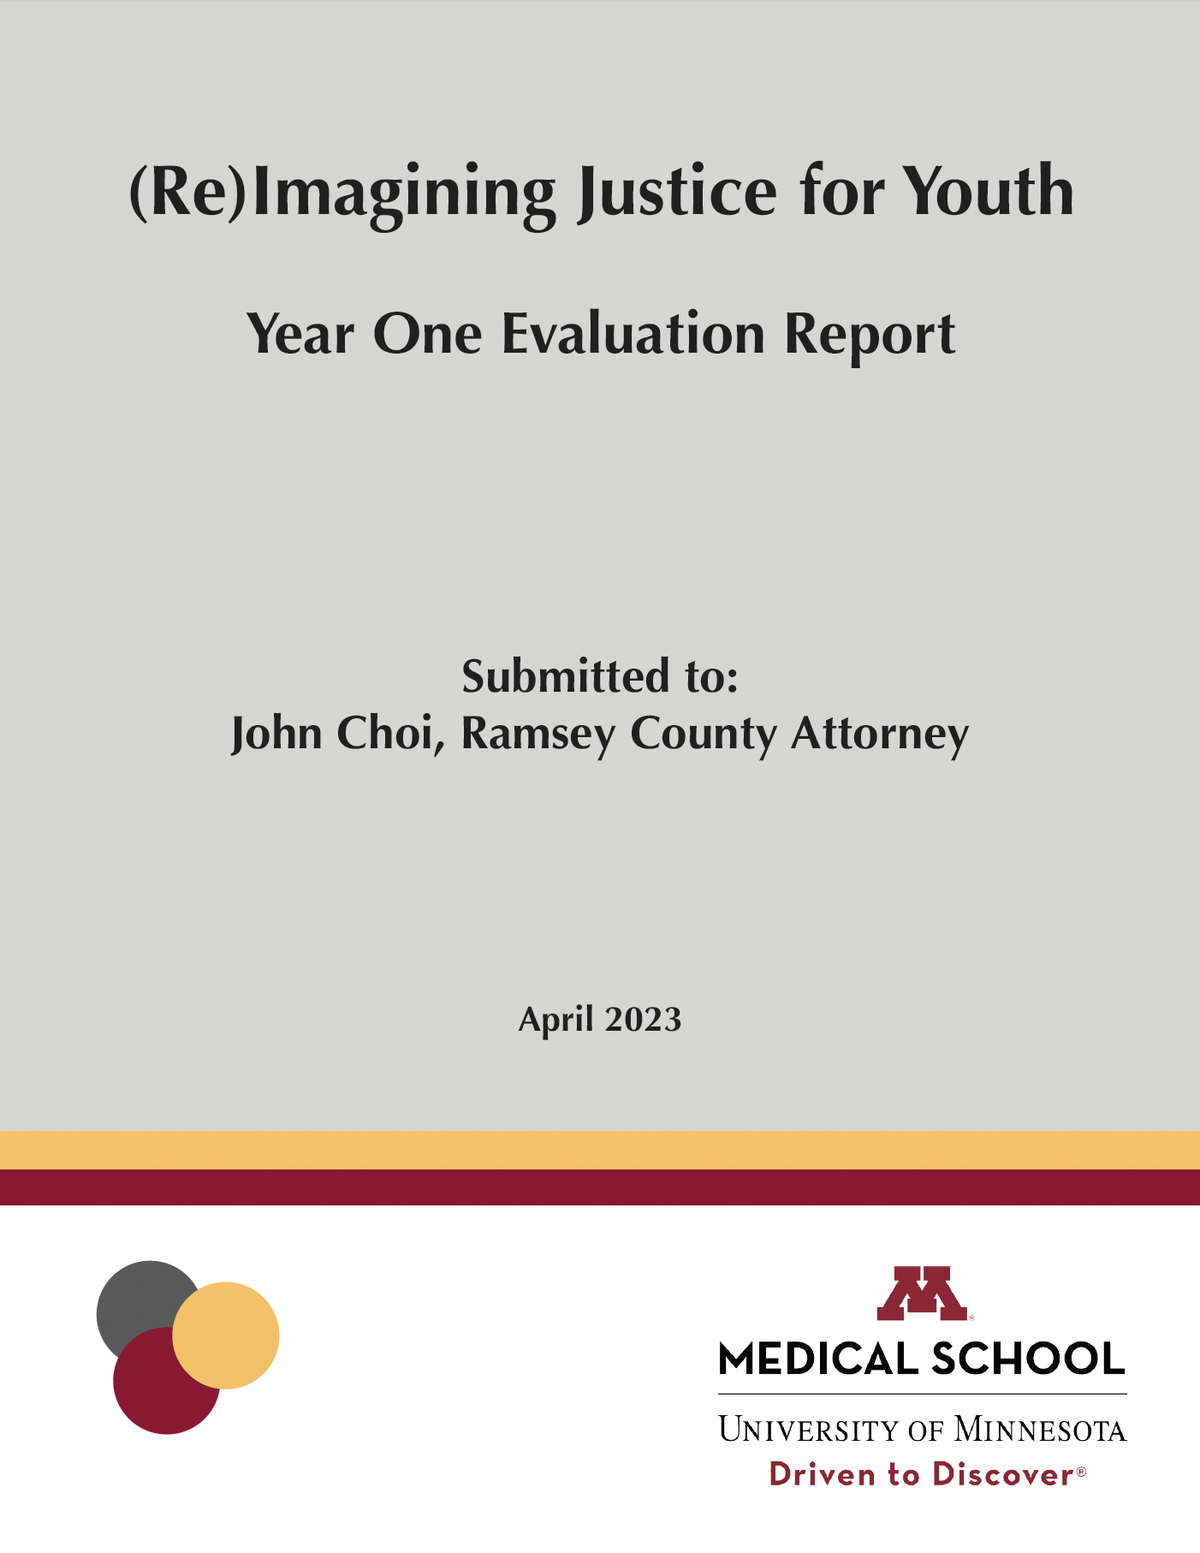 (Re)Imagining Justice for Youth Image